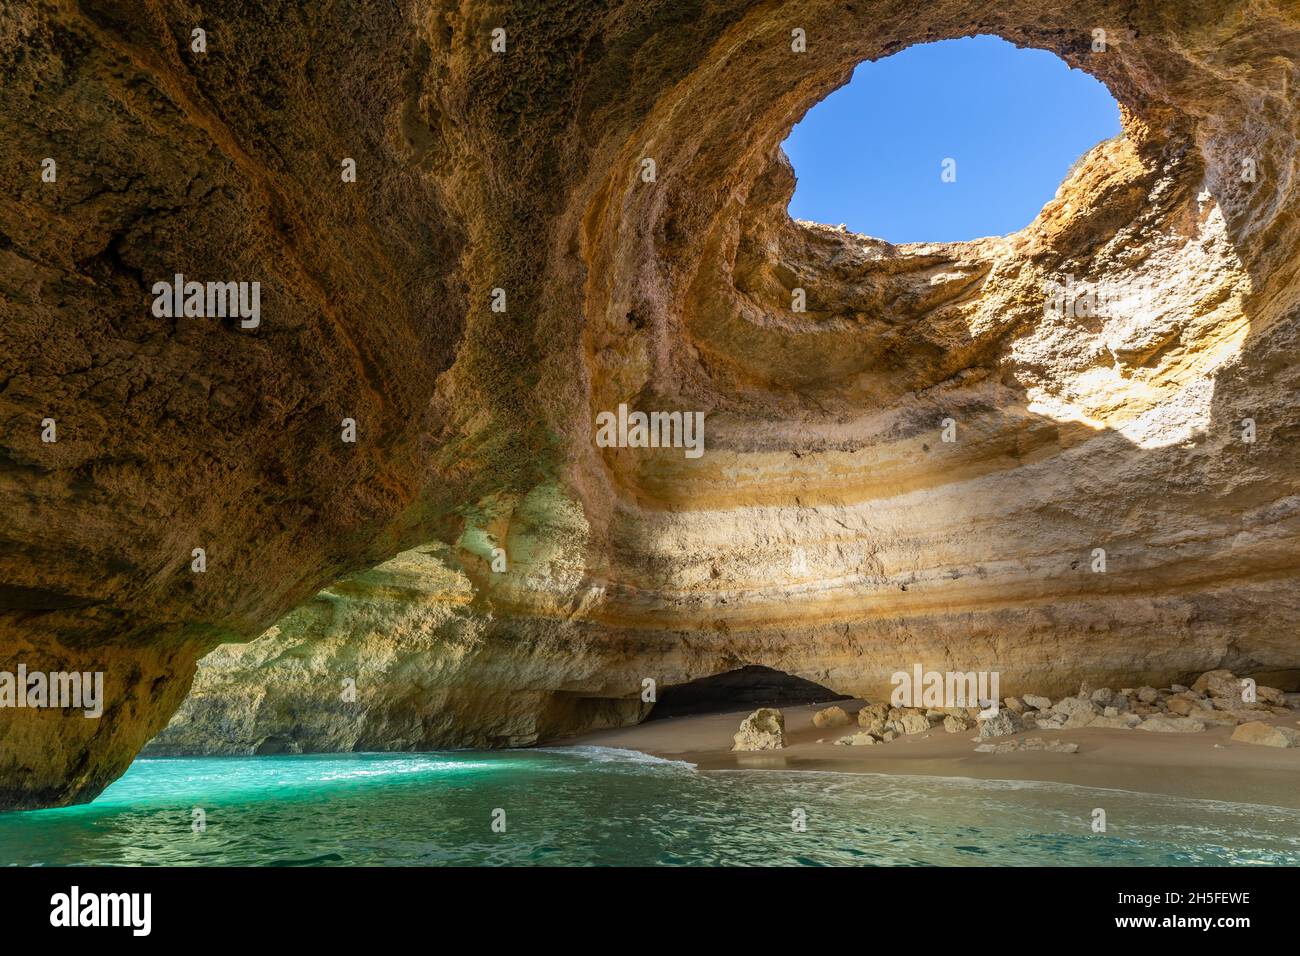 The seacave of Benagil is a well known tourist destination. The seacave has a hole in the roof and is accessed by boat. It is located in the Algarve r. Stock Photo